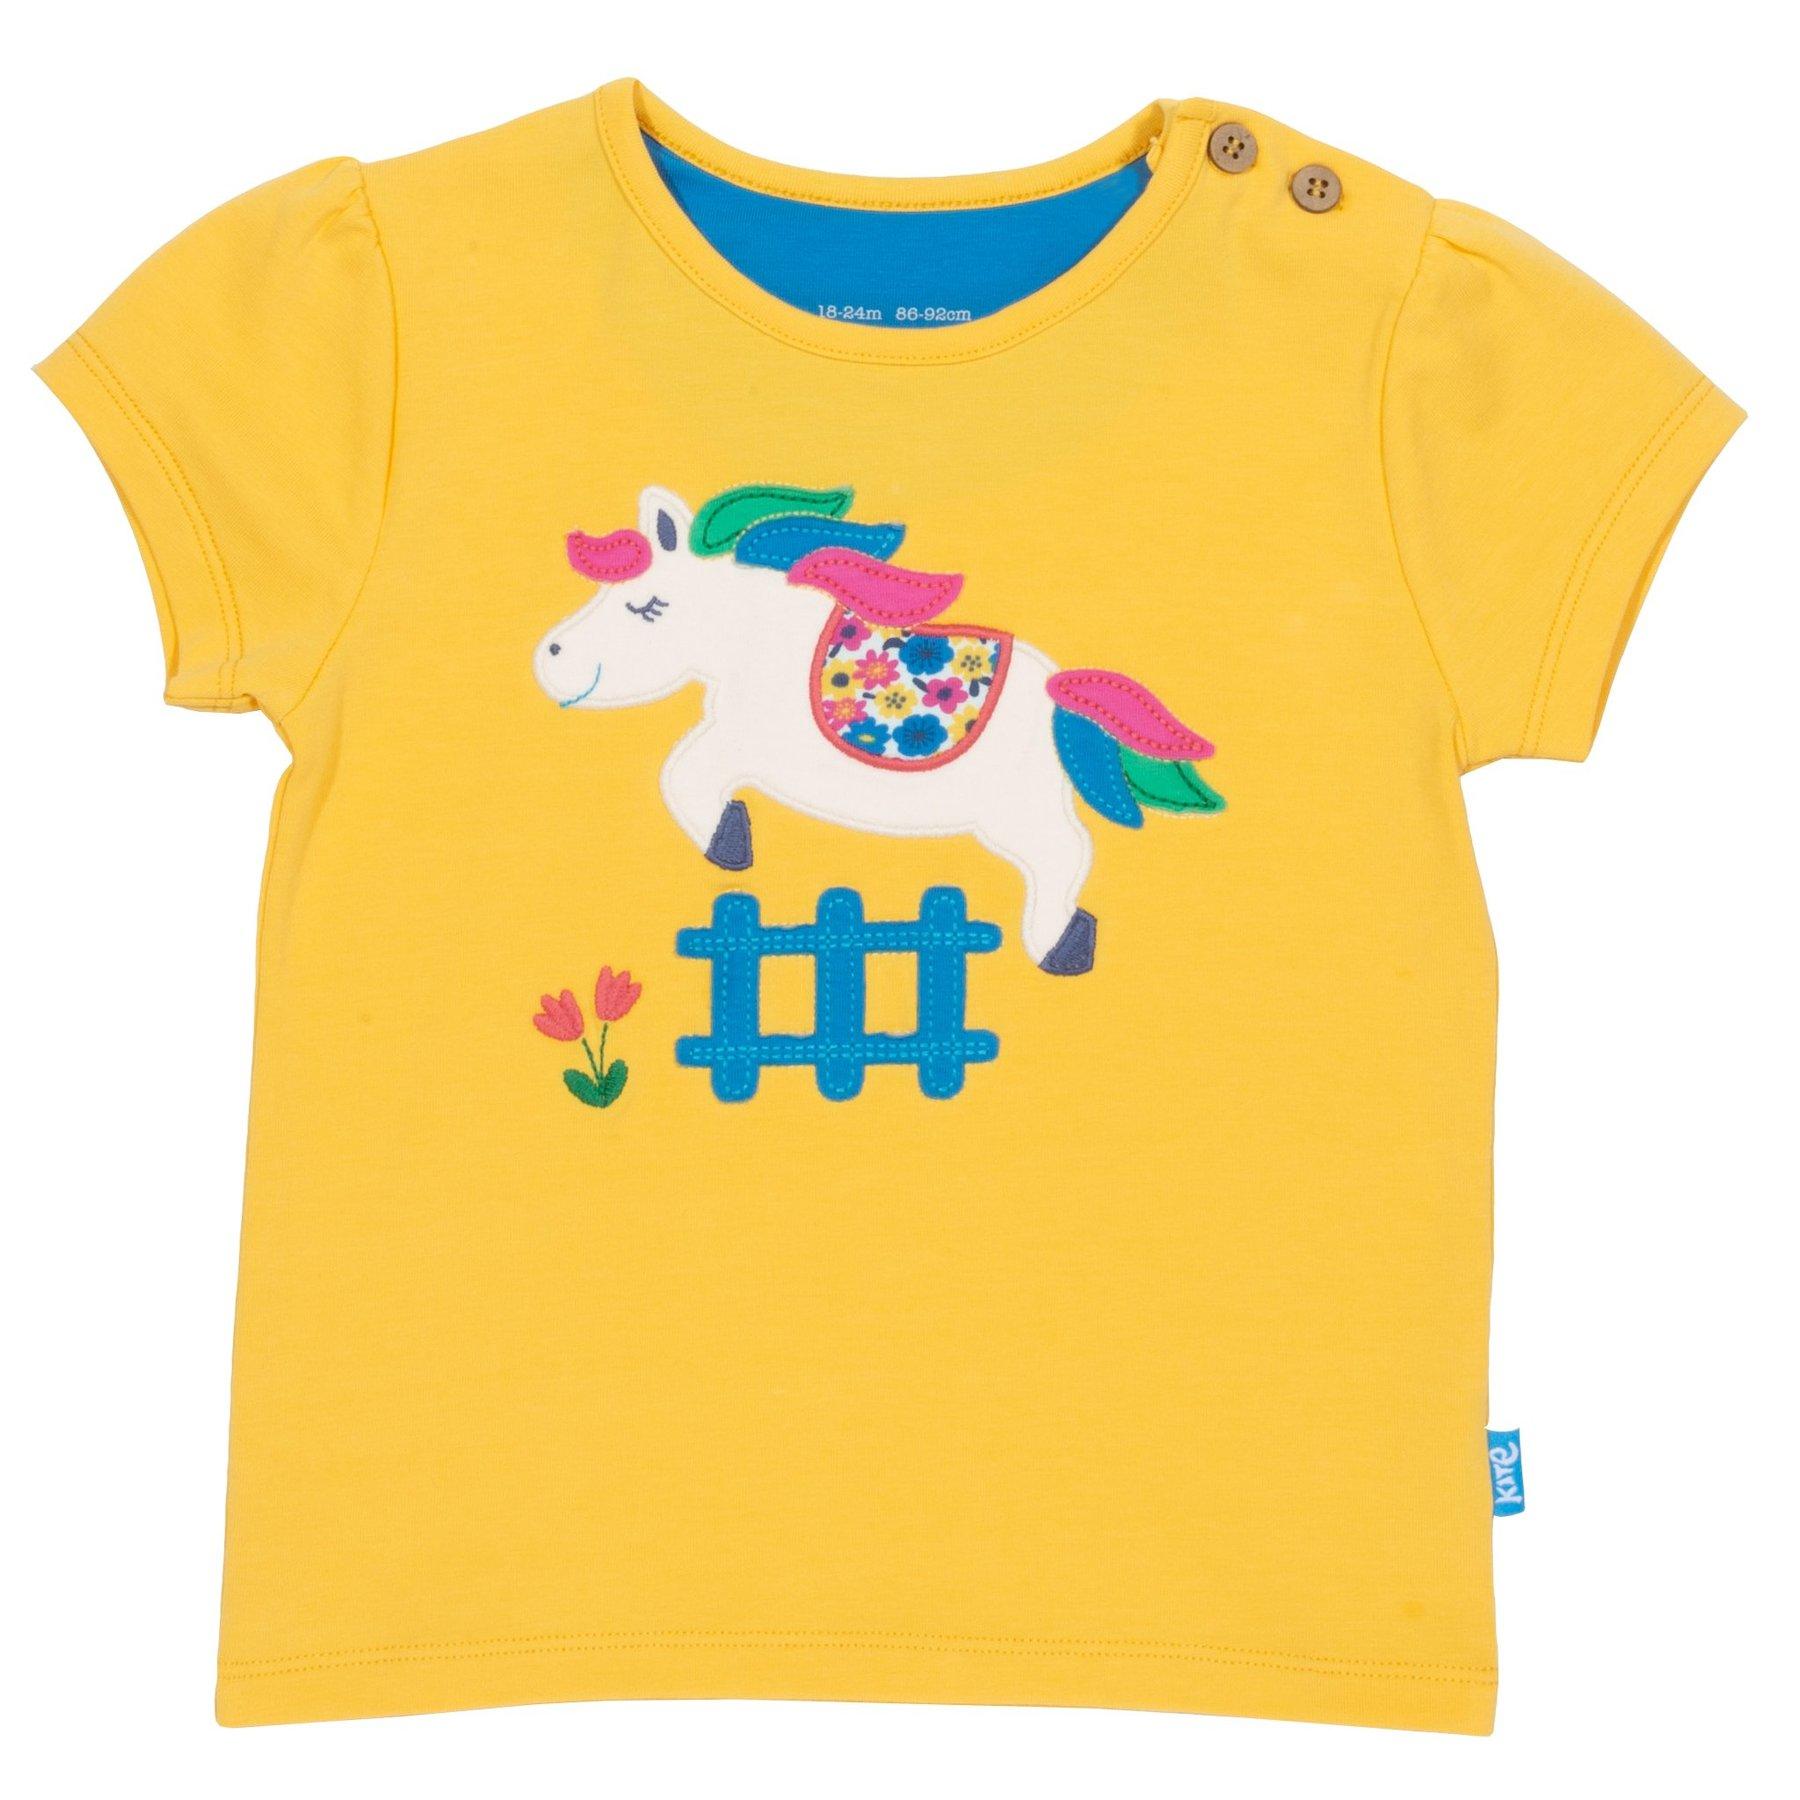 Kite Clothing Little Pony T-Shirt front